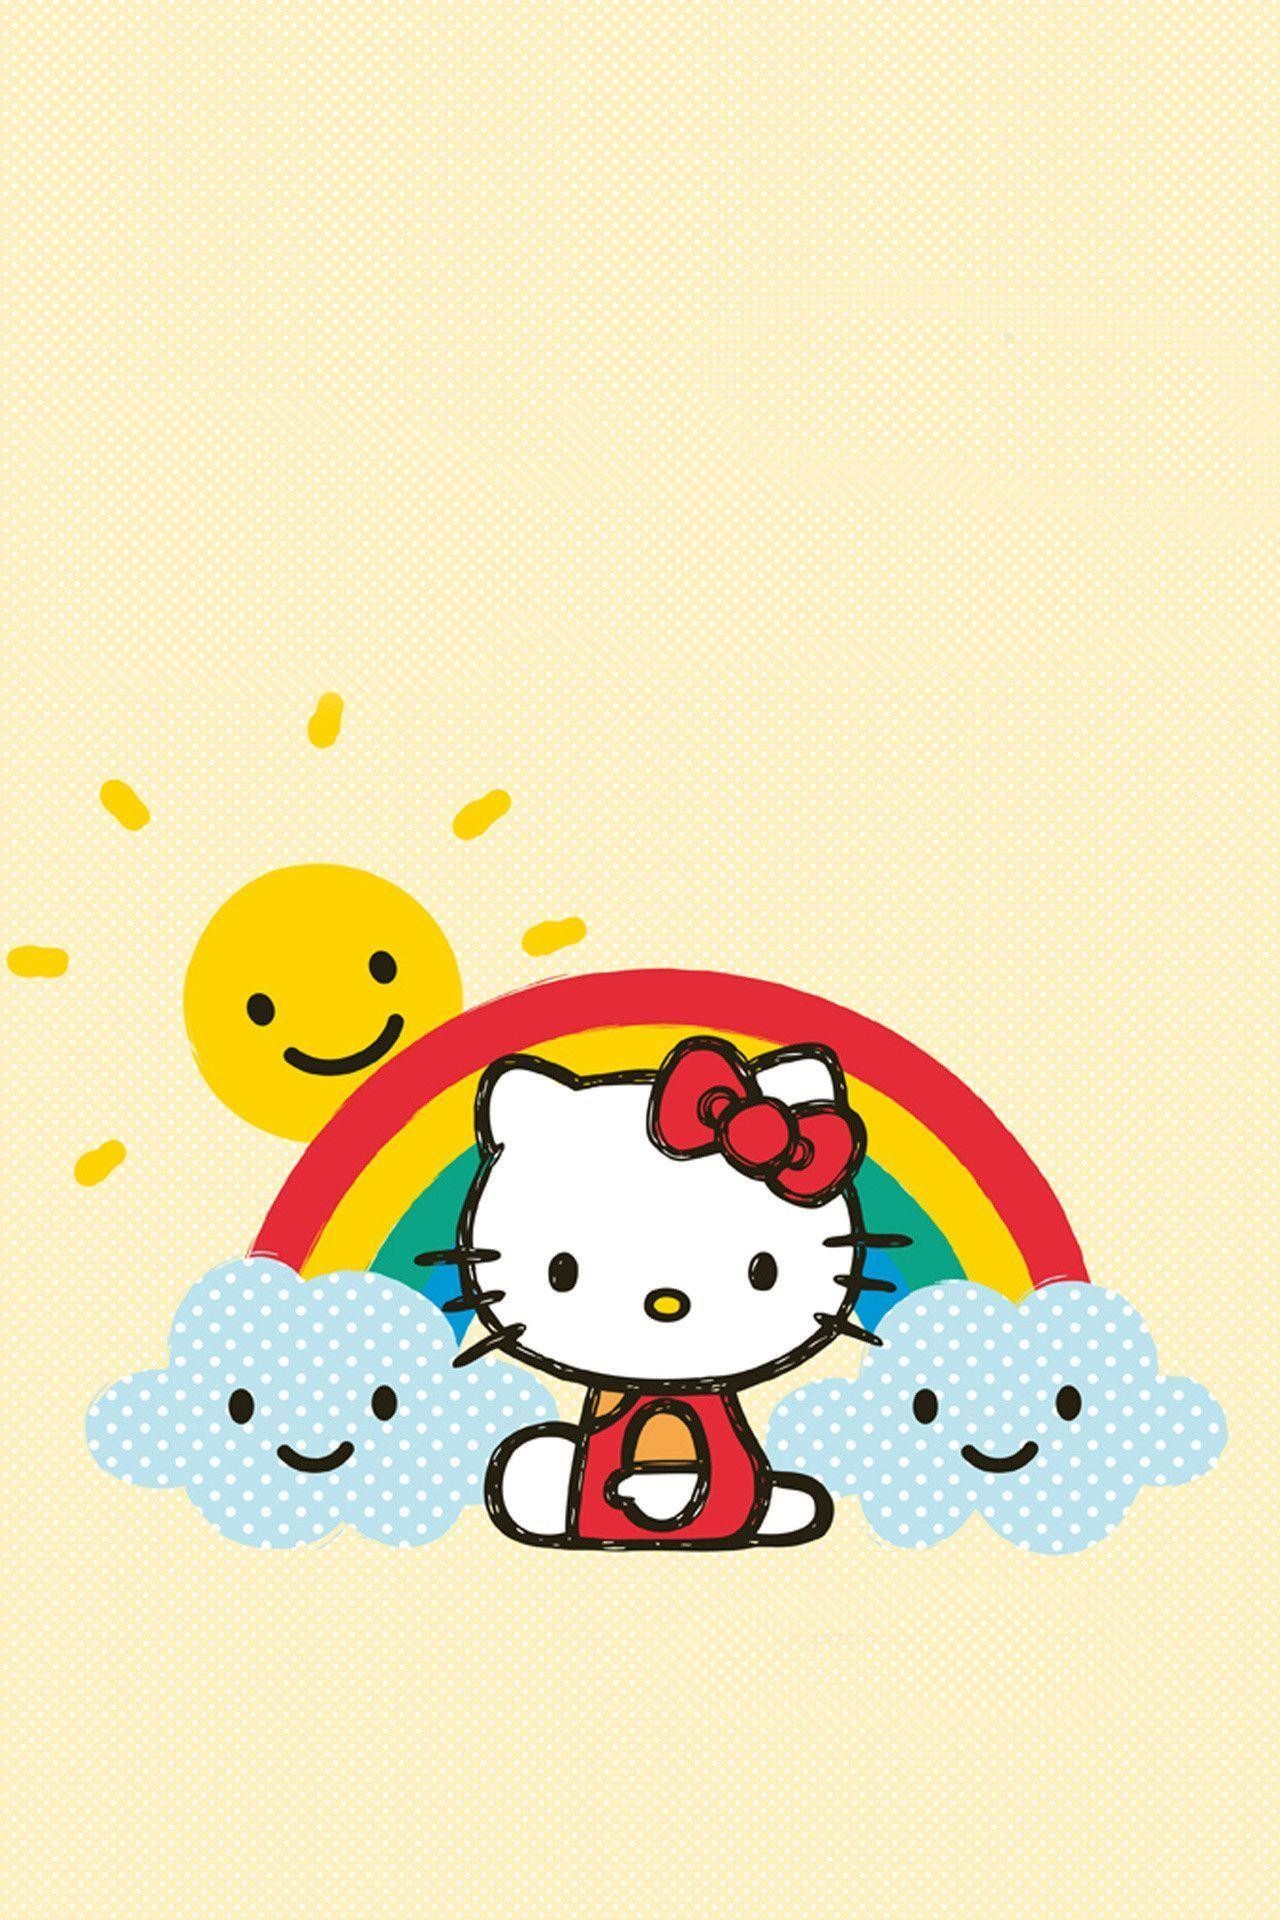 Sanrio Wallpapers | Free for iPhone and Galaxy from Lollimobile